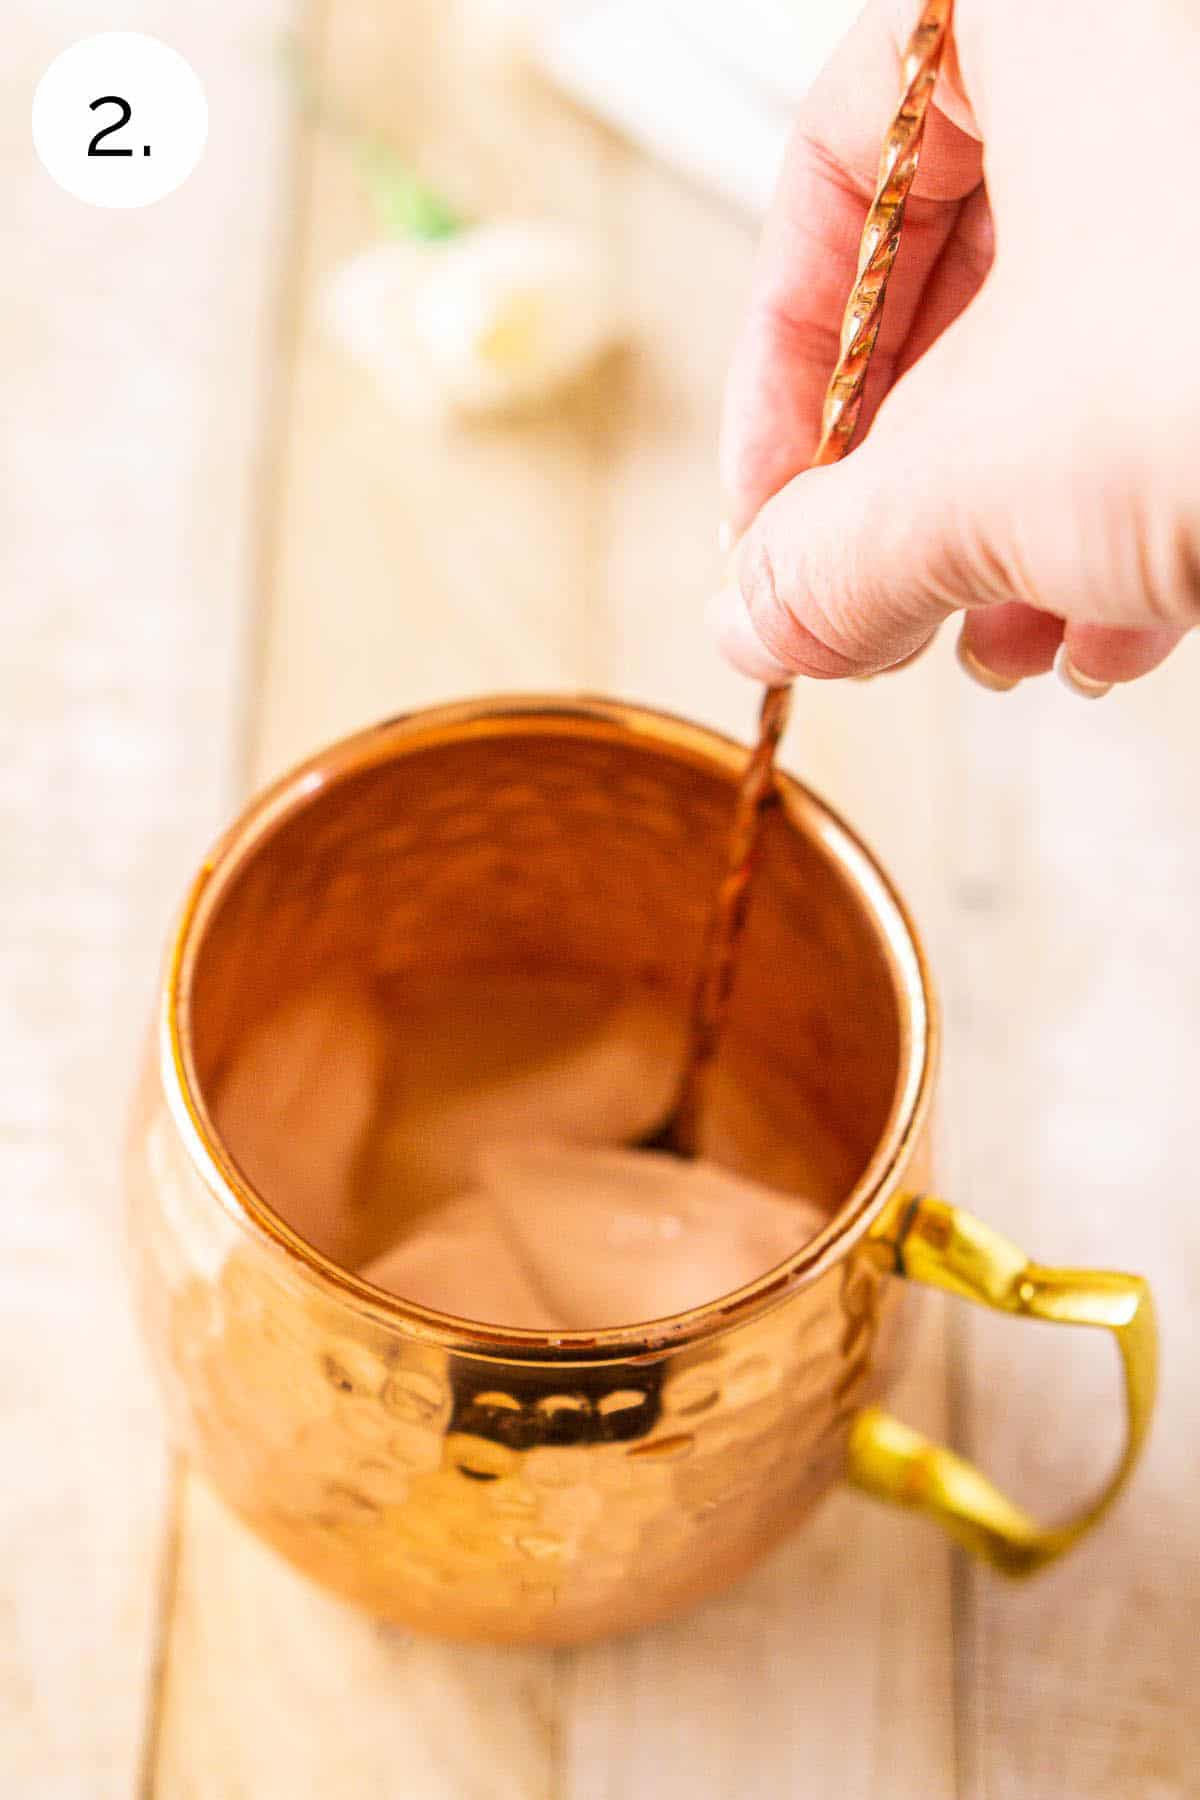 A hand using a copper bar spoon to mix the lime juice, gin and ice in a mug.